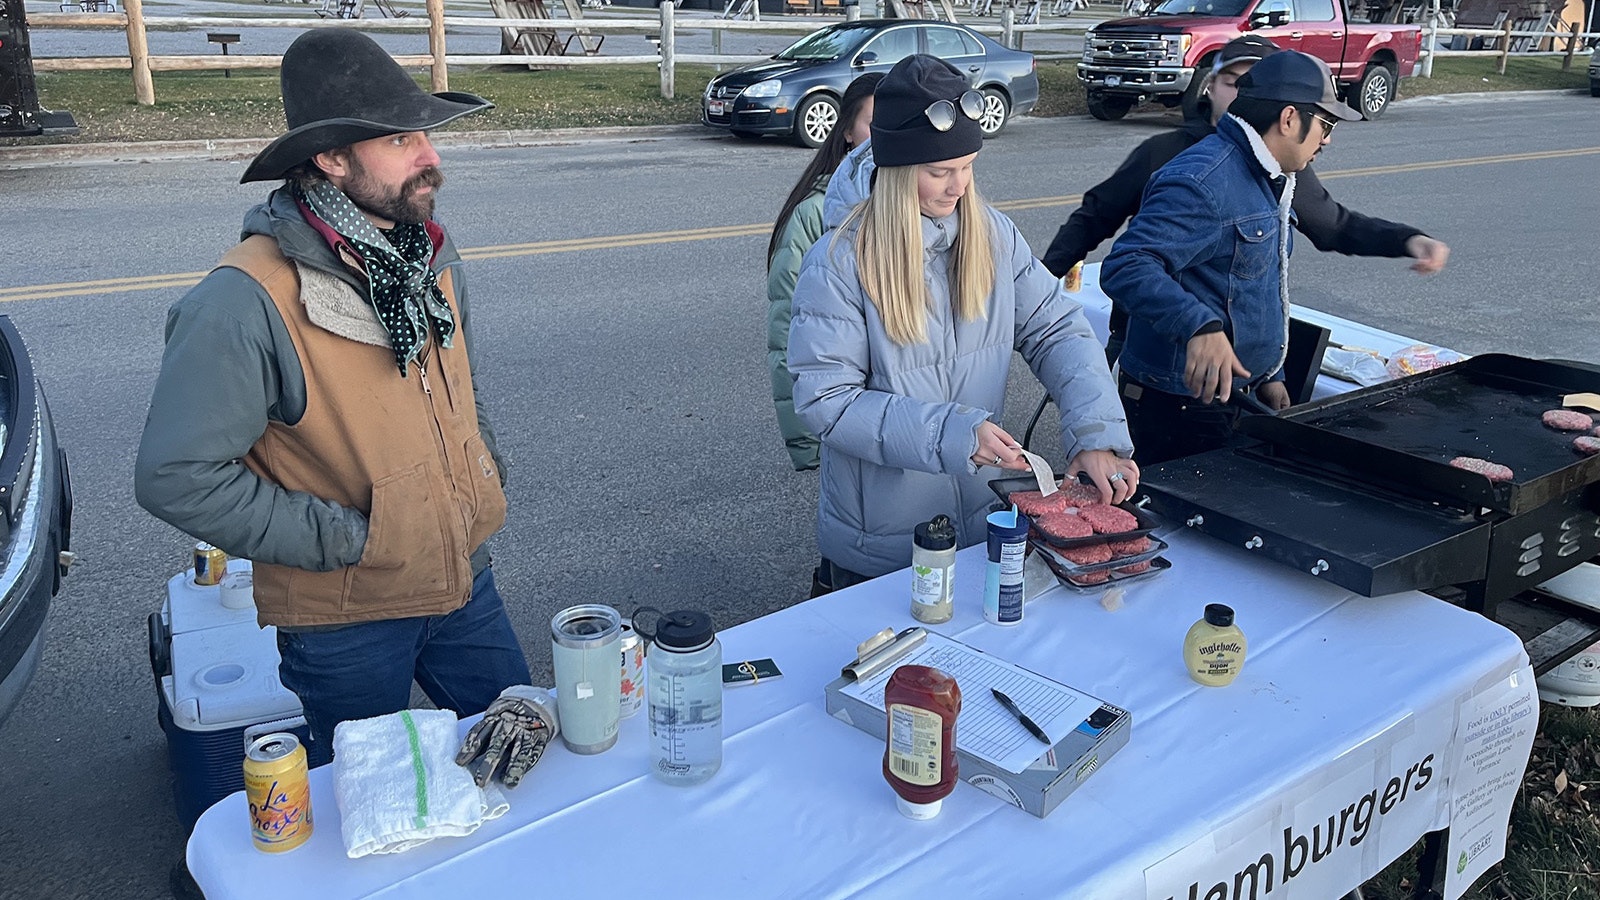 Jake Hutton, left, runs JH Outfitting out of Kelly in the Grand Teton National Park. His horses graze on the parcel in question. He and his crew brought a couple of equine customers and grilled up free hamburgers for attendees Thursday night.